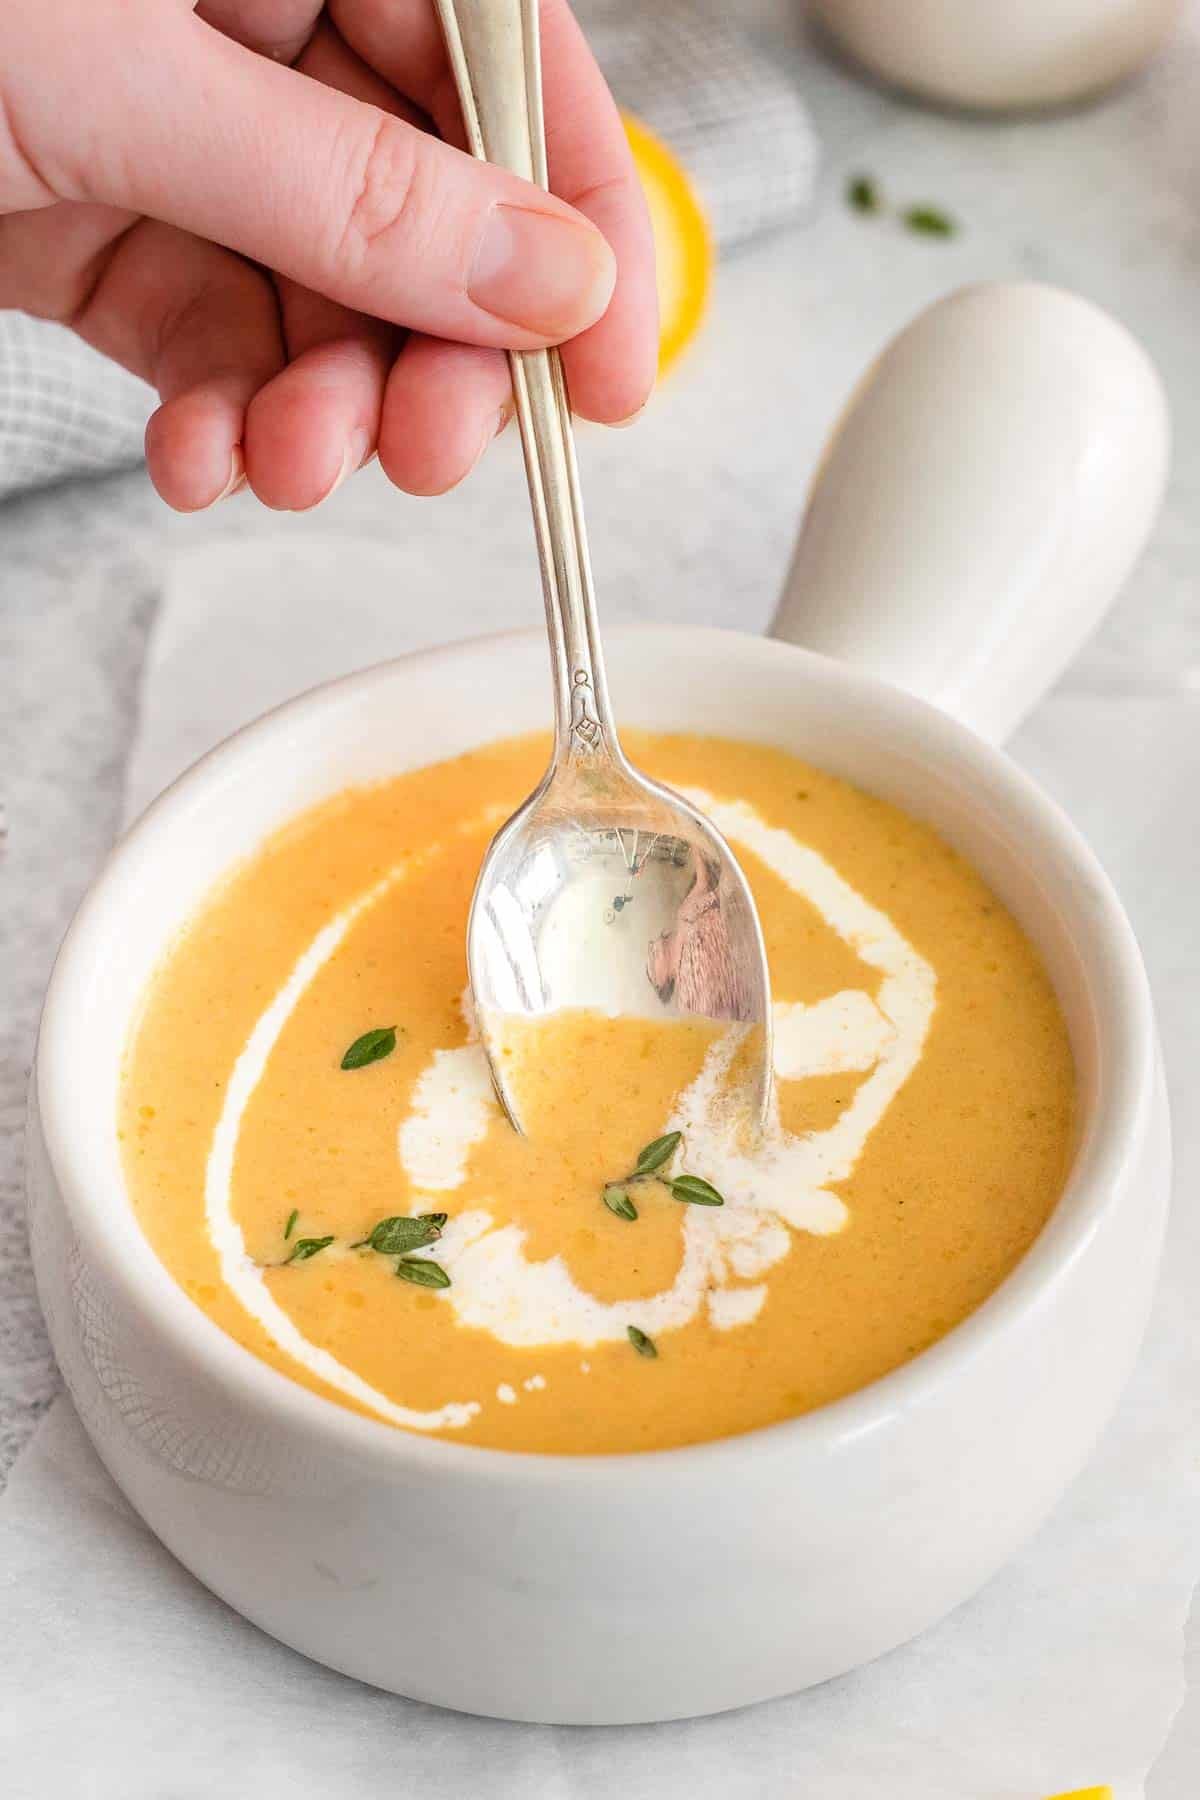 Yellow squash soup in a small white bowl with hand holding spoon in the soup.